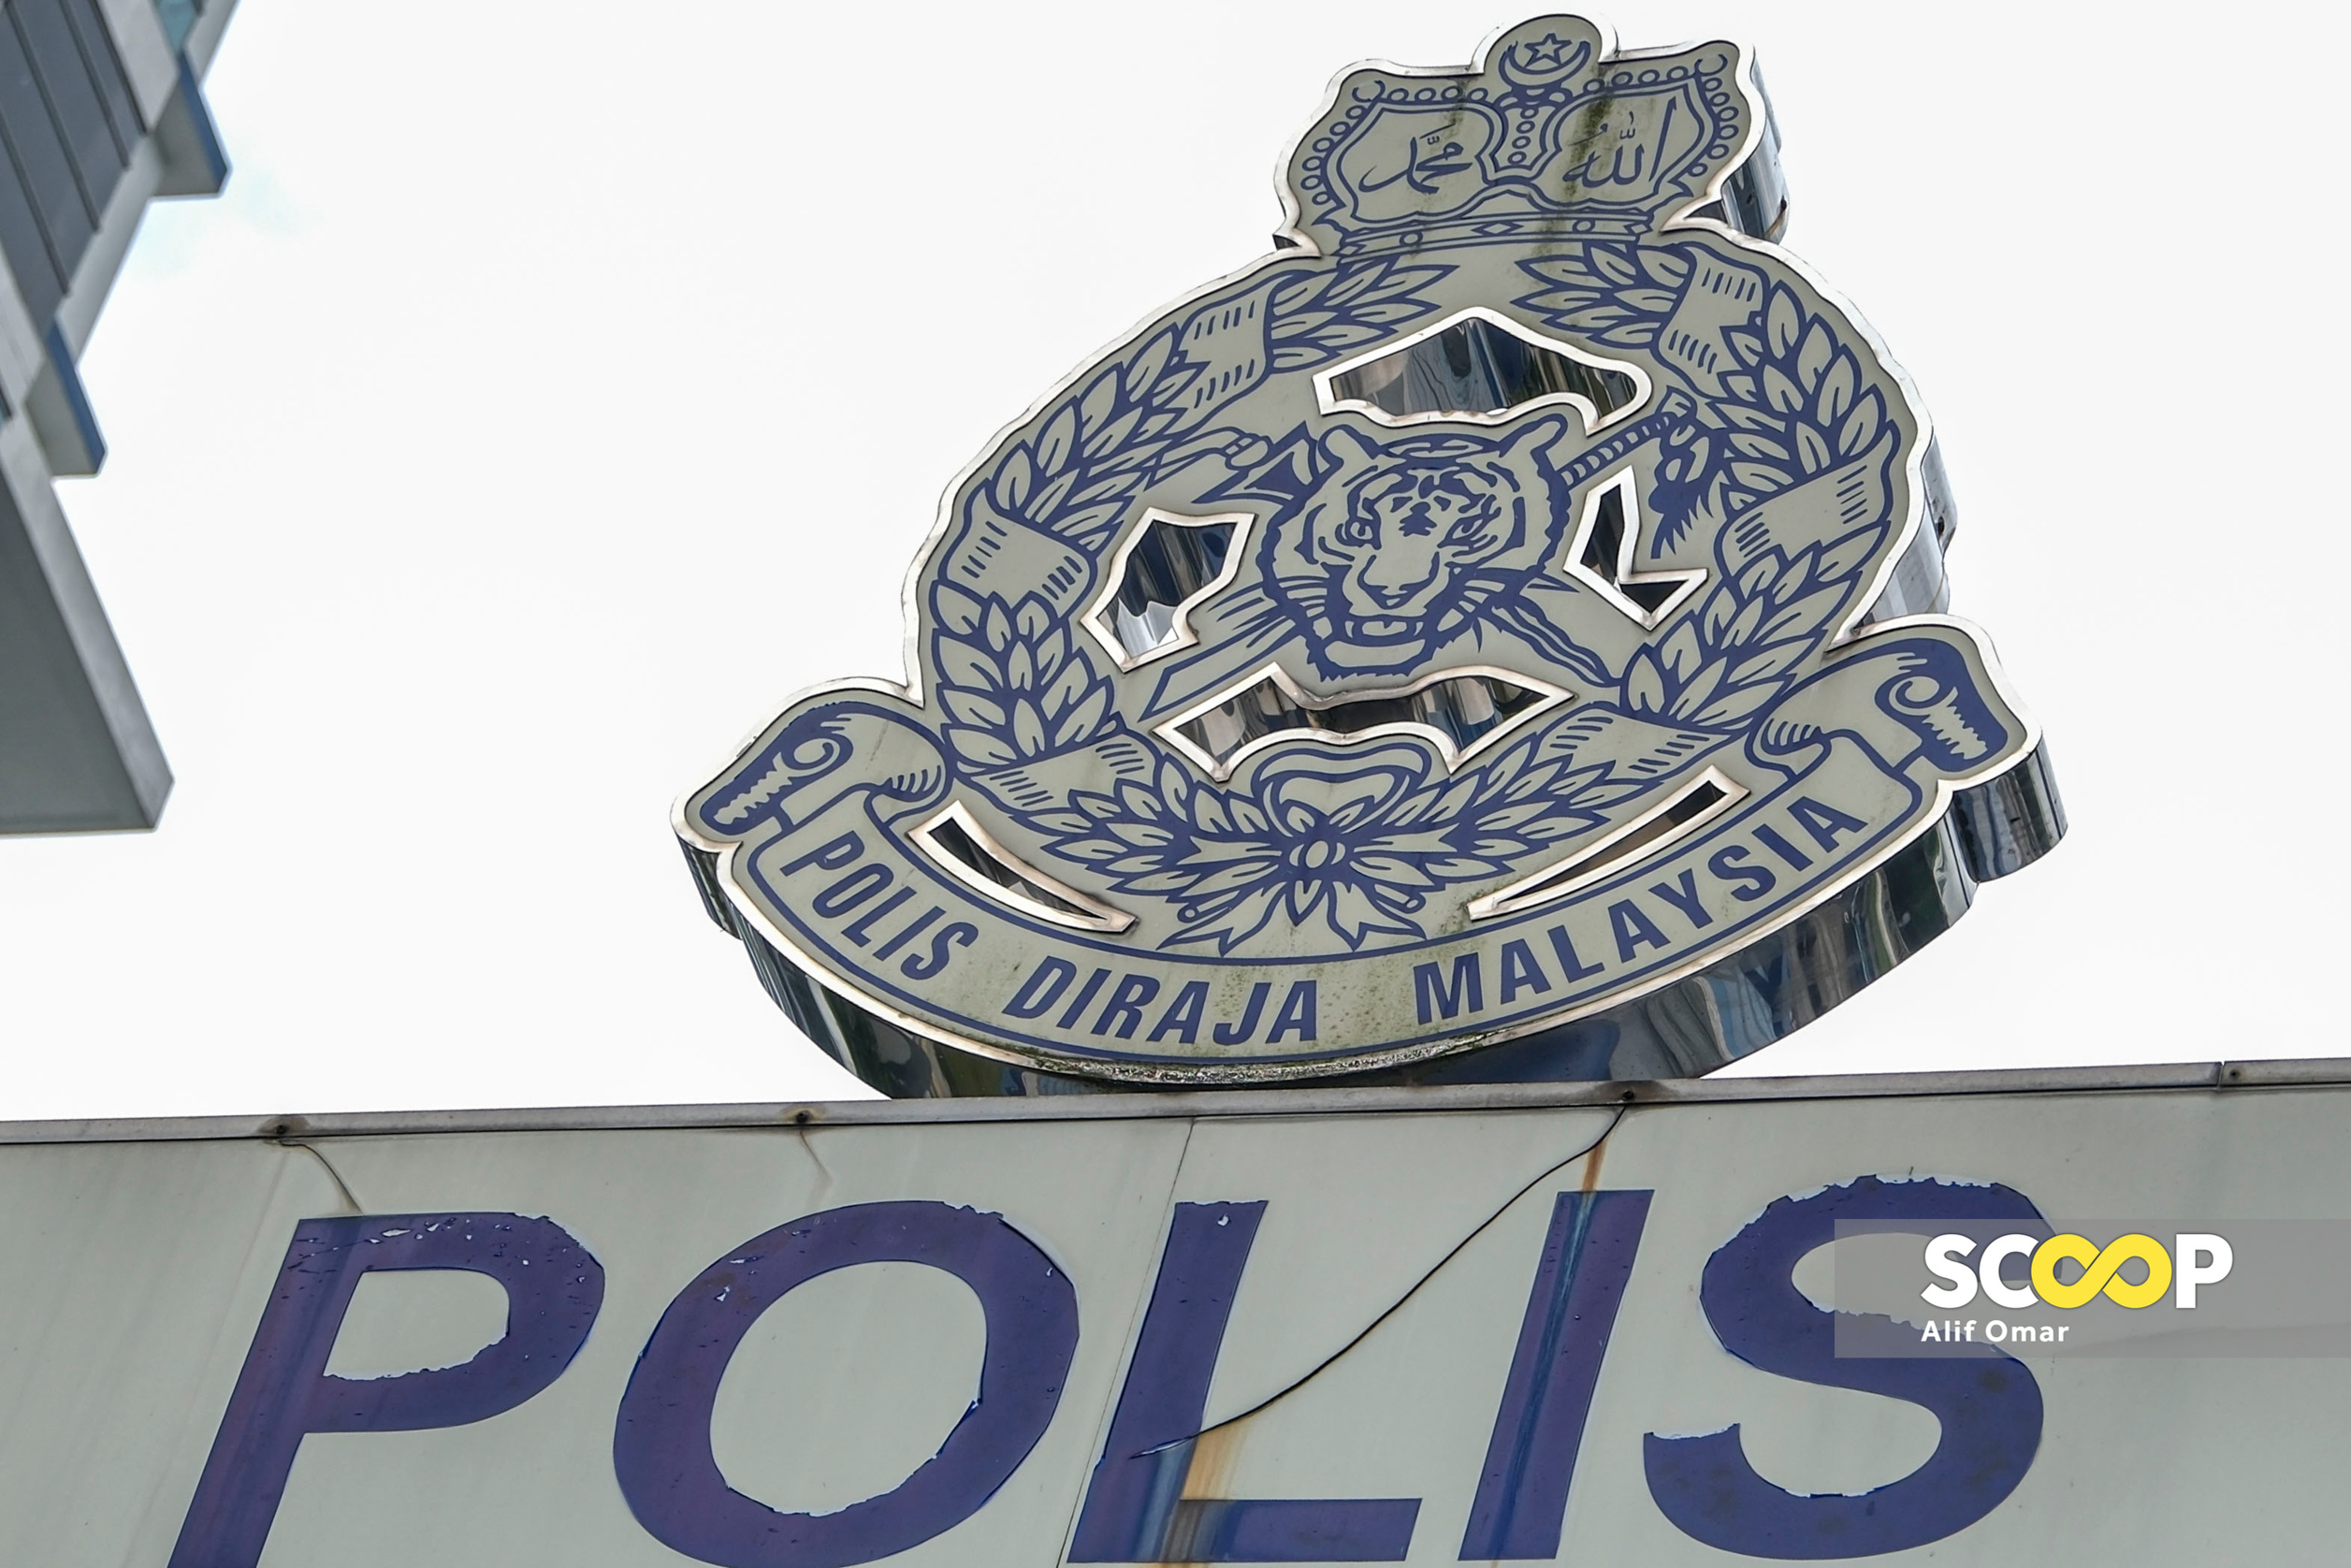 [UPDATED] Agus-Wahab video case: police record Mr H’s statement